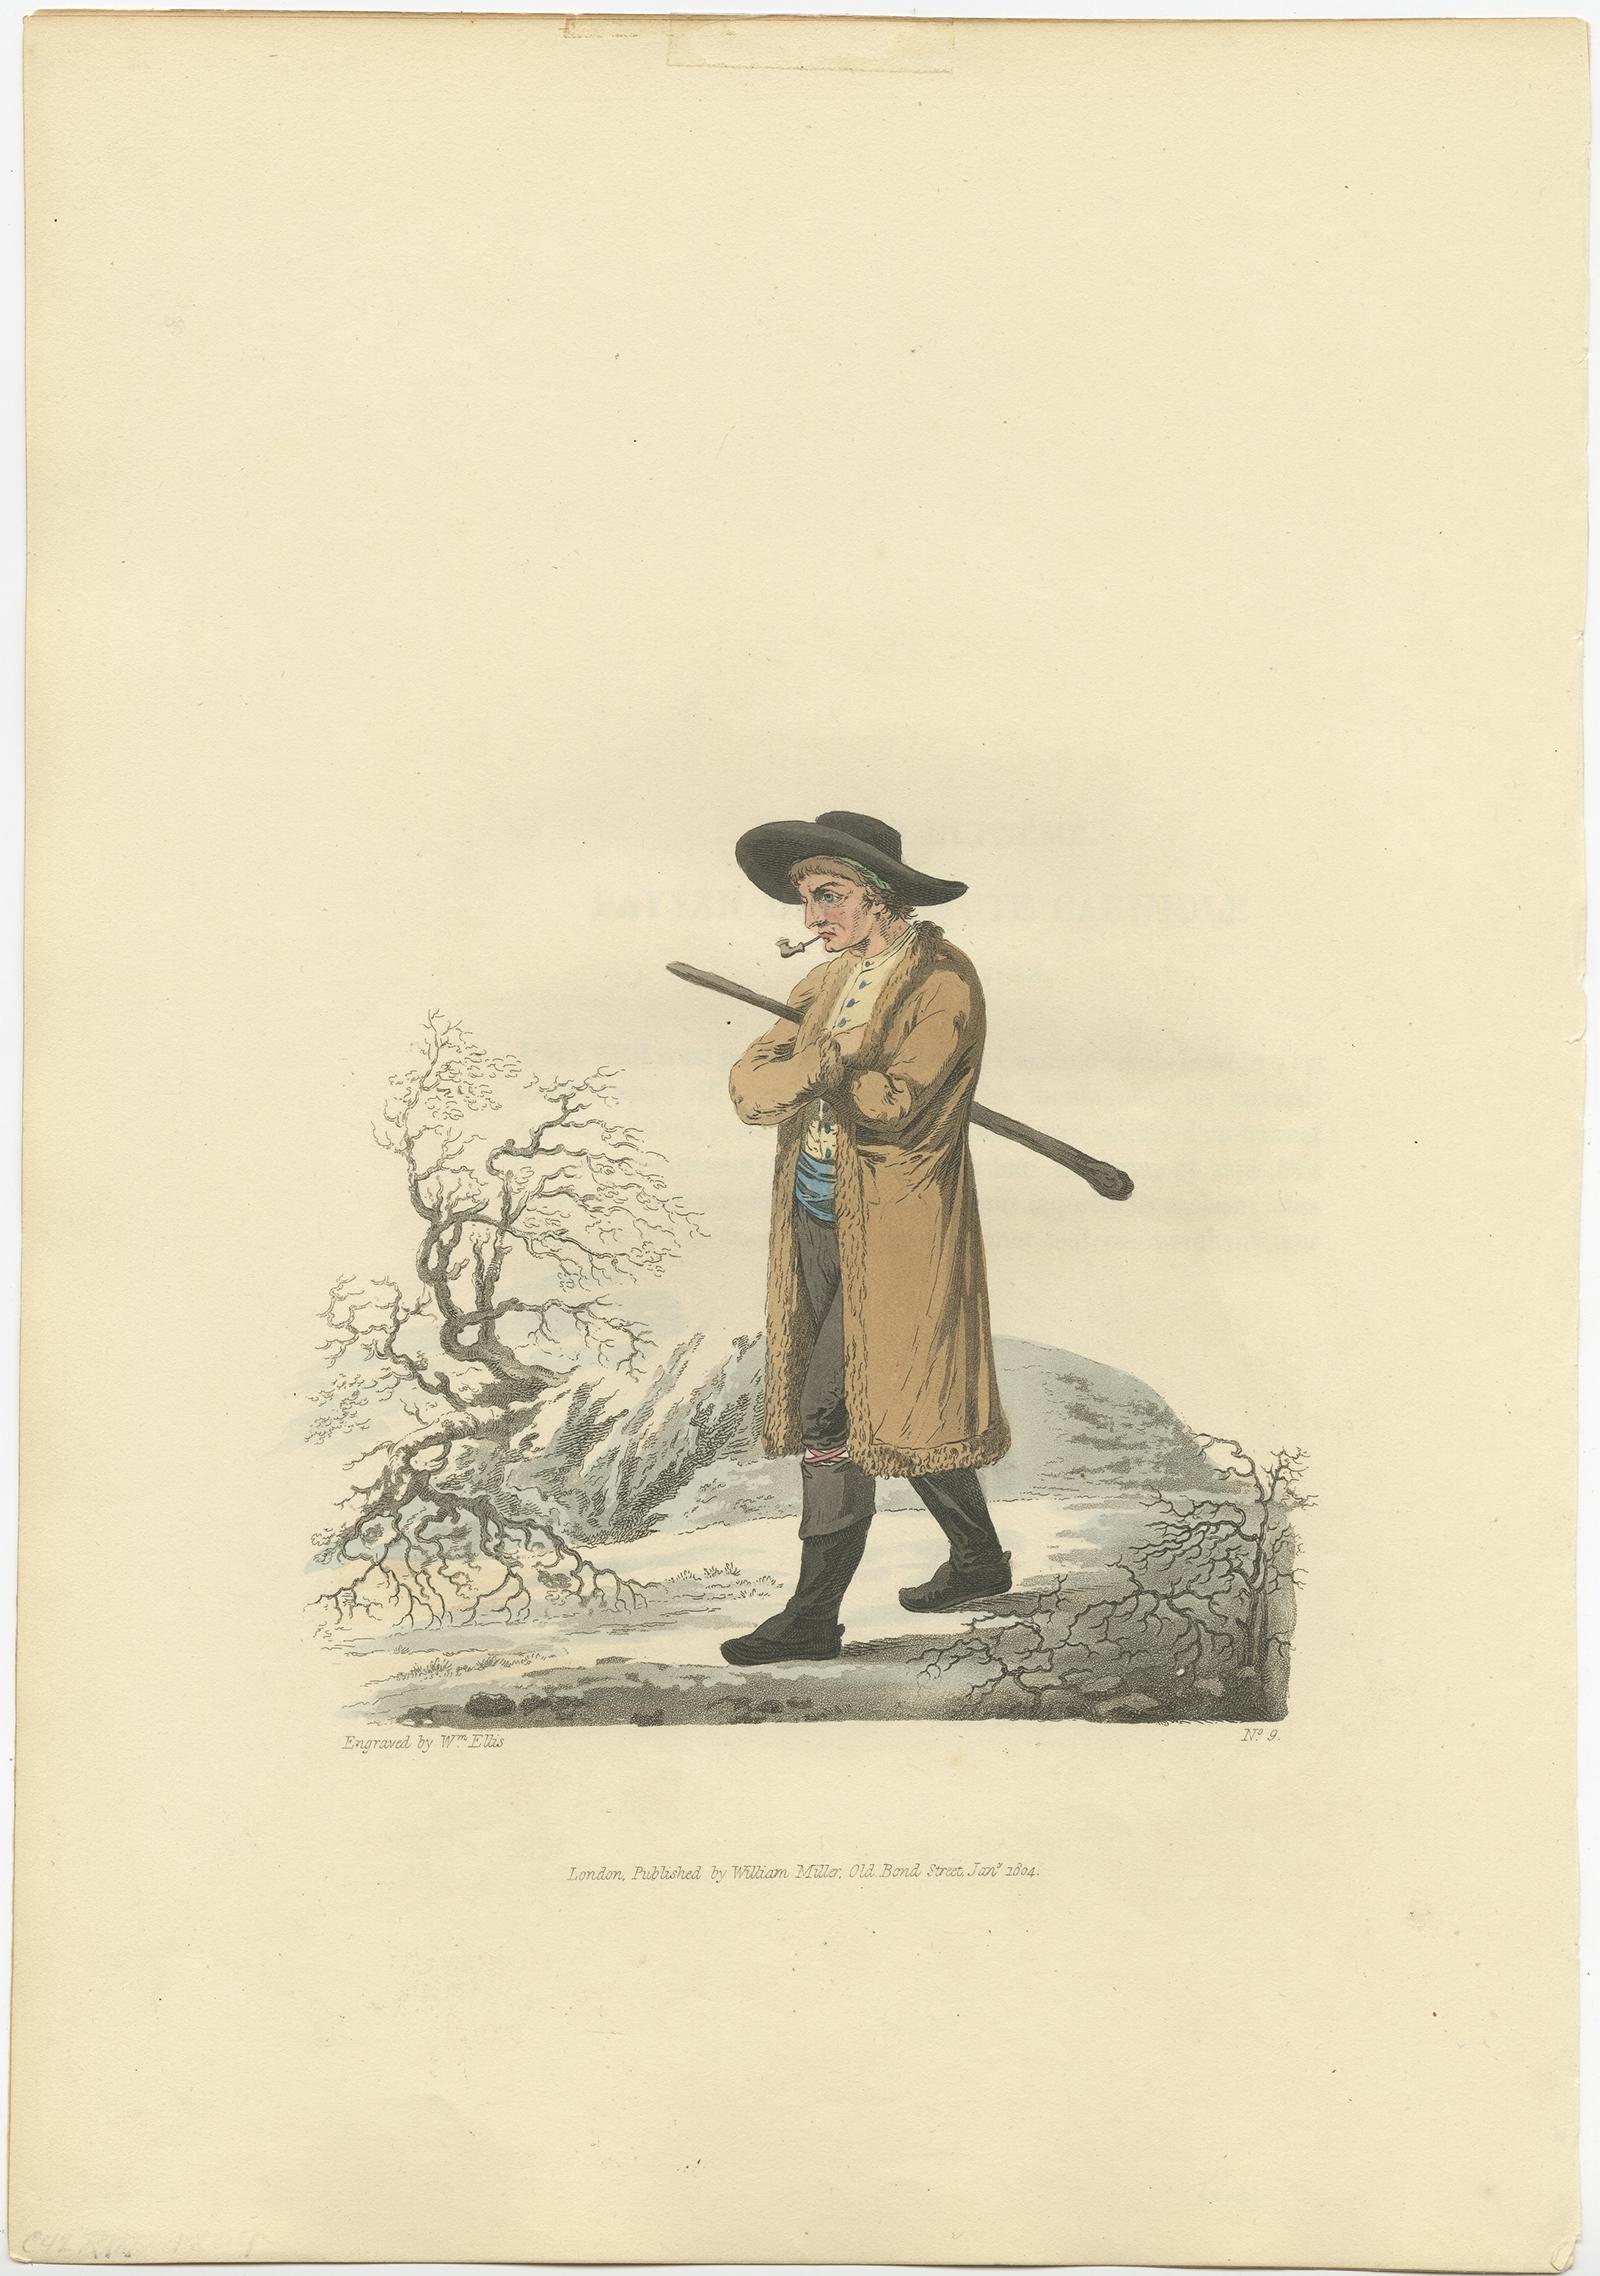 Old print of a peasant of upper Carniola, Slovenia. 

This print originates from 'The Costume of the Hereditary States of the House of Austria' by William Miller. 

Artists and engravers: Engraved by William Ellis.